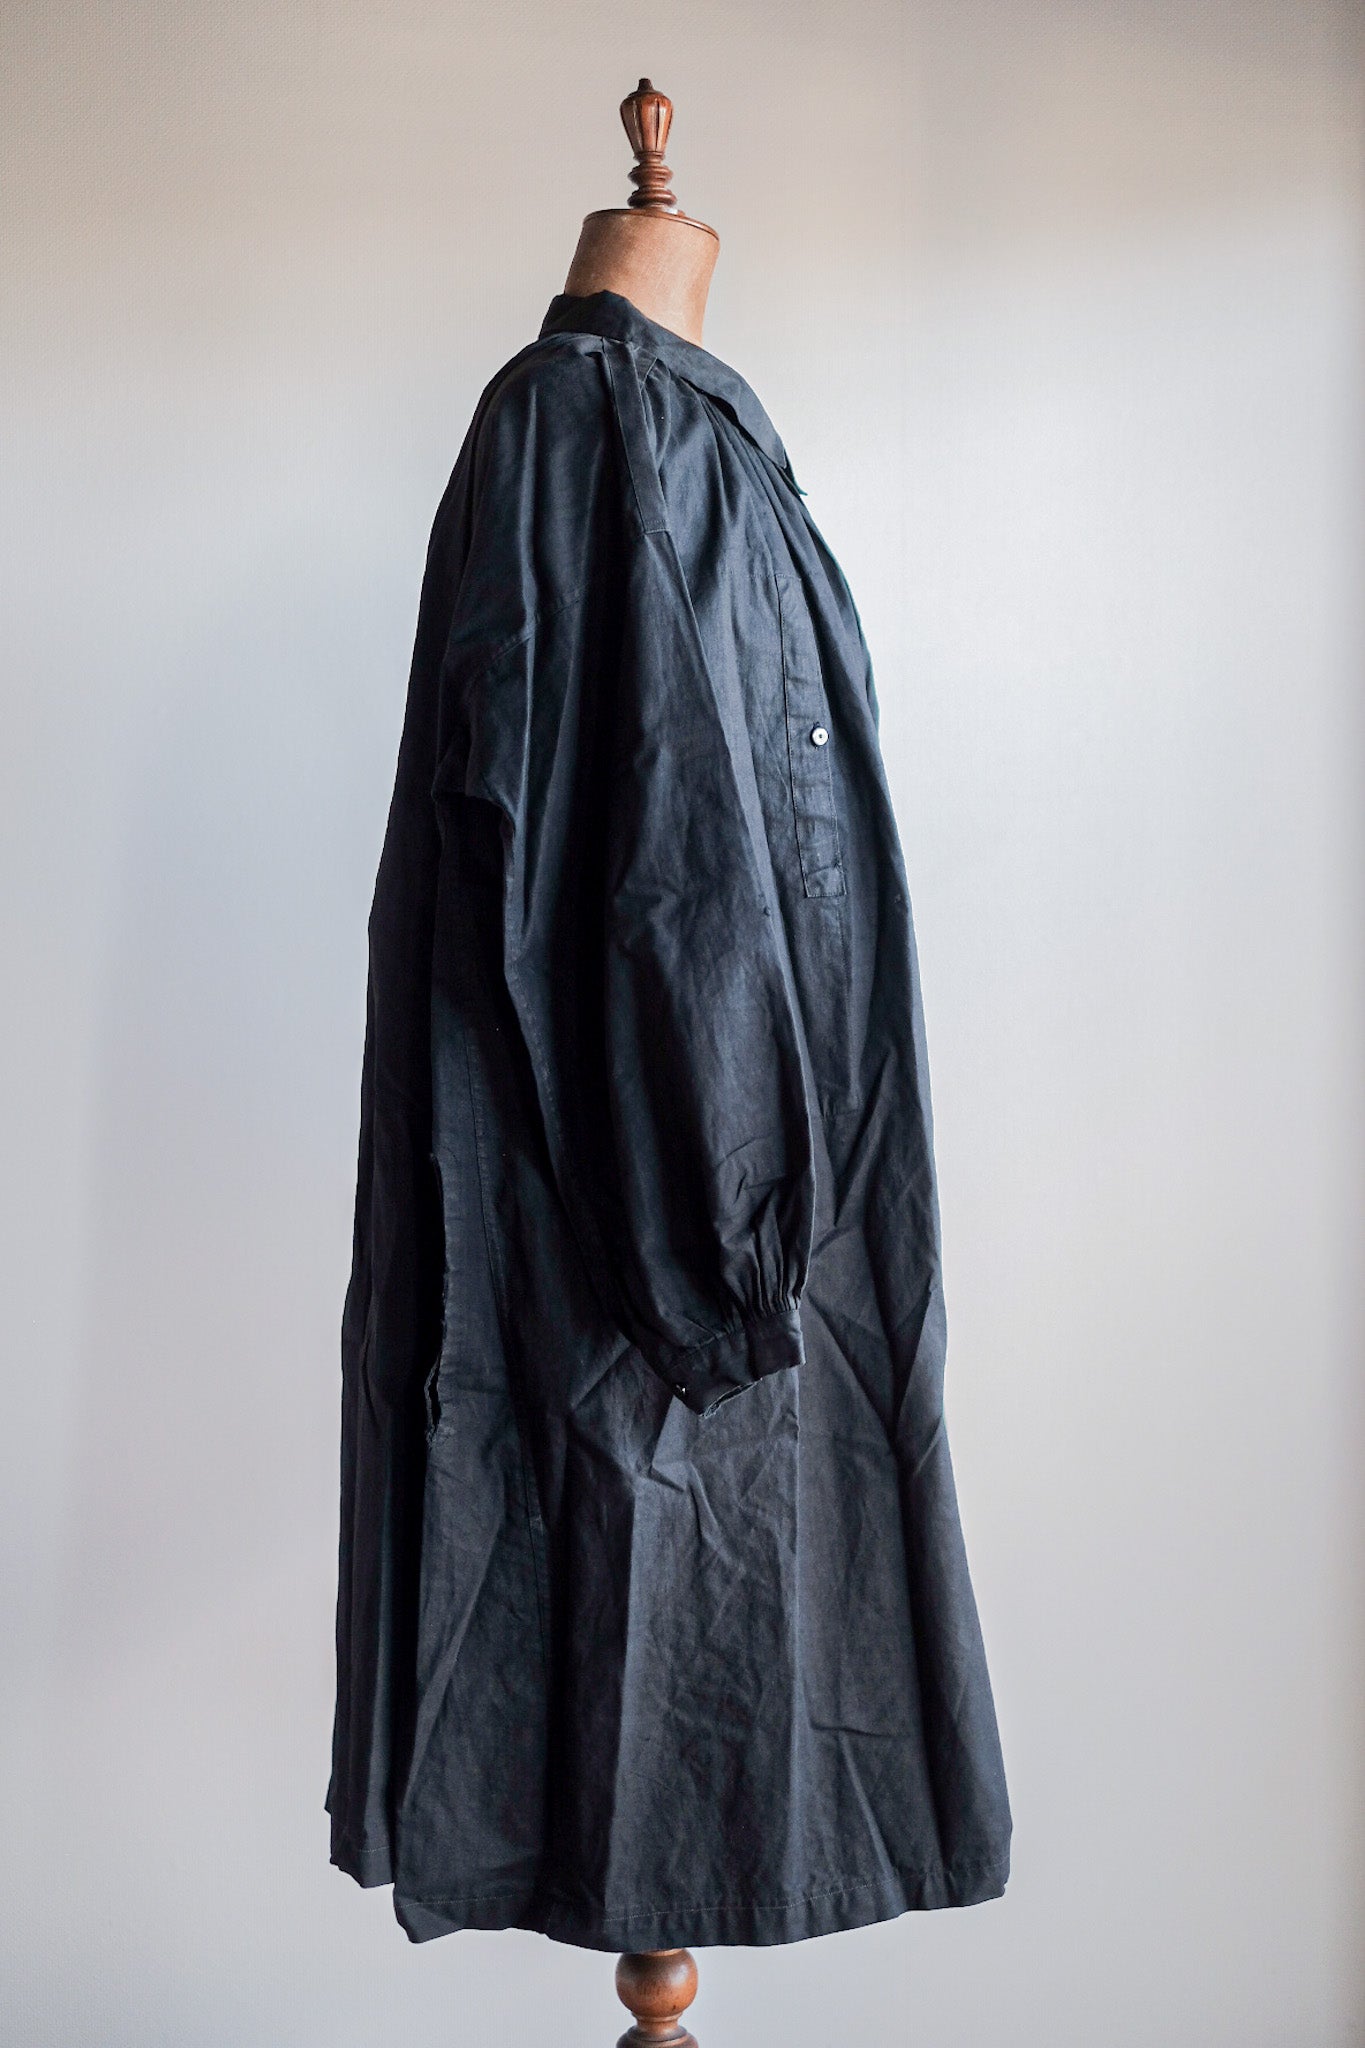 [Early 20th C] French Antique Black Linen Smock "Biaude"